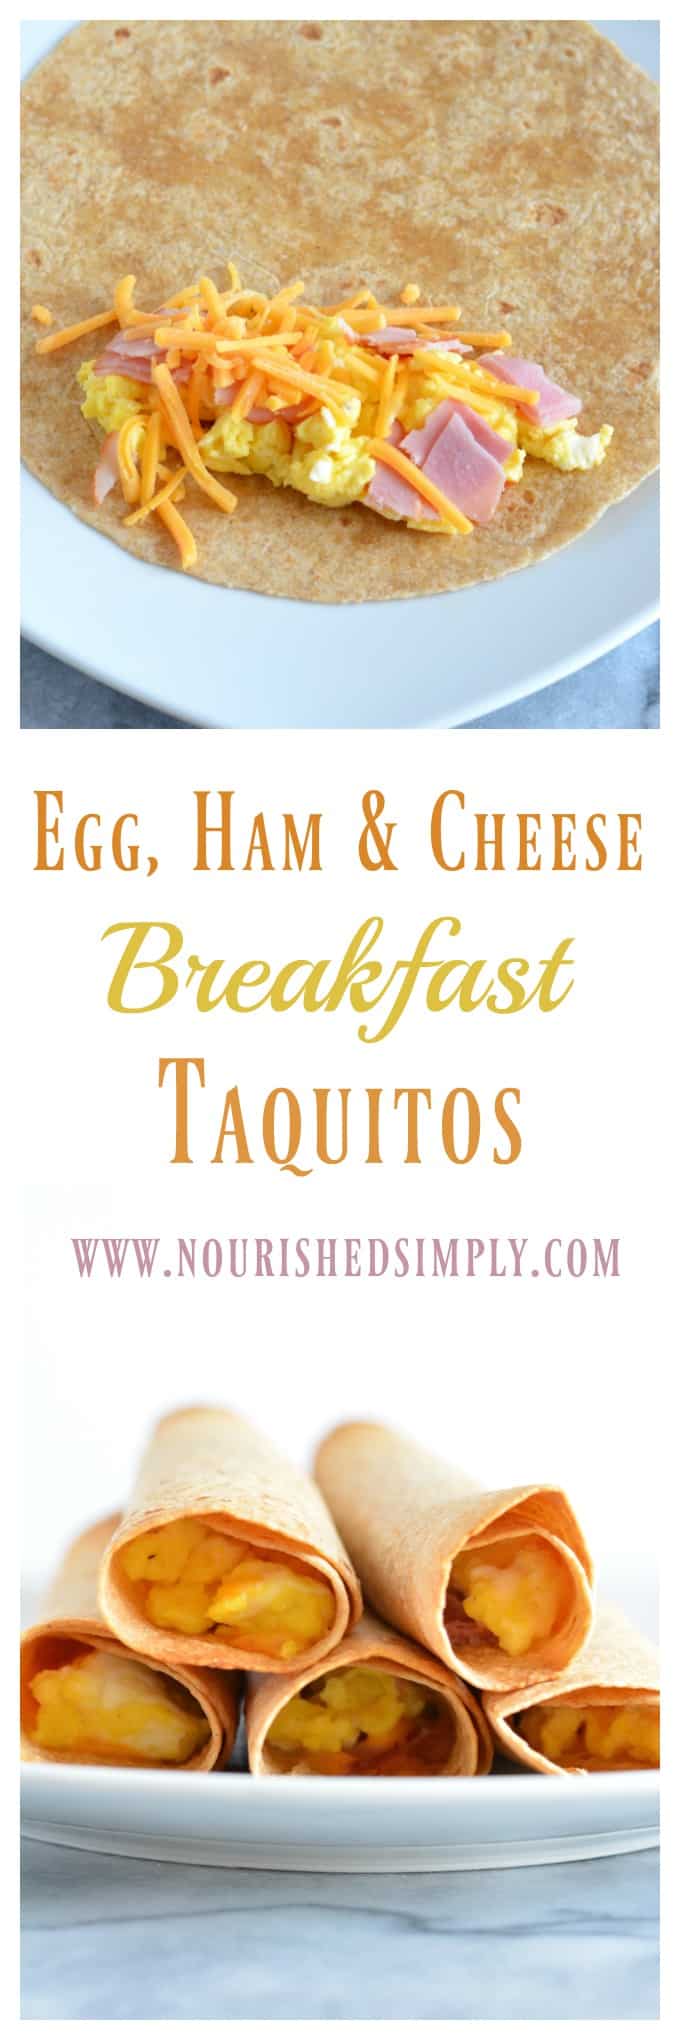 Breakfast Taquito with ham, cheese, and egg is a great grab and go breakfast.